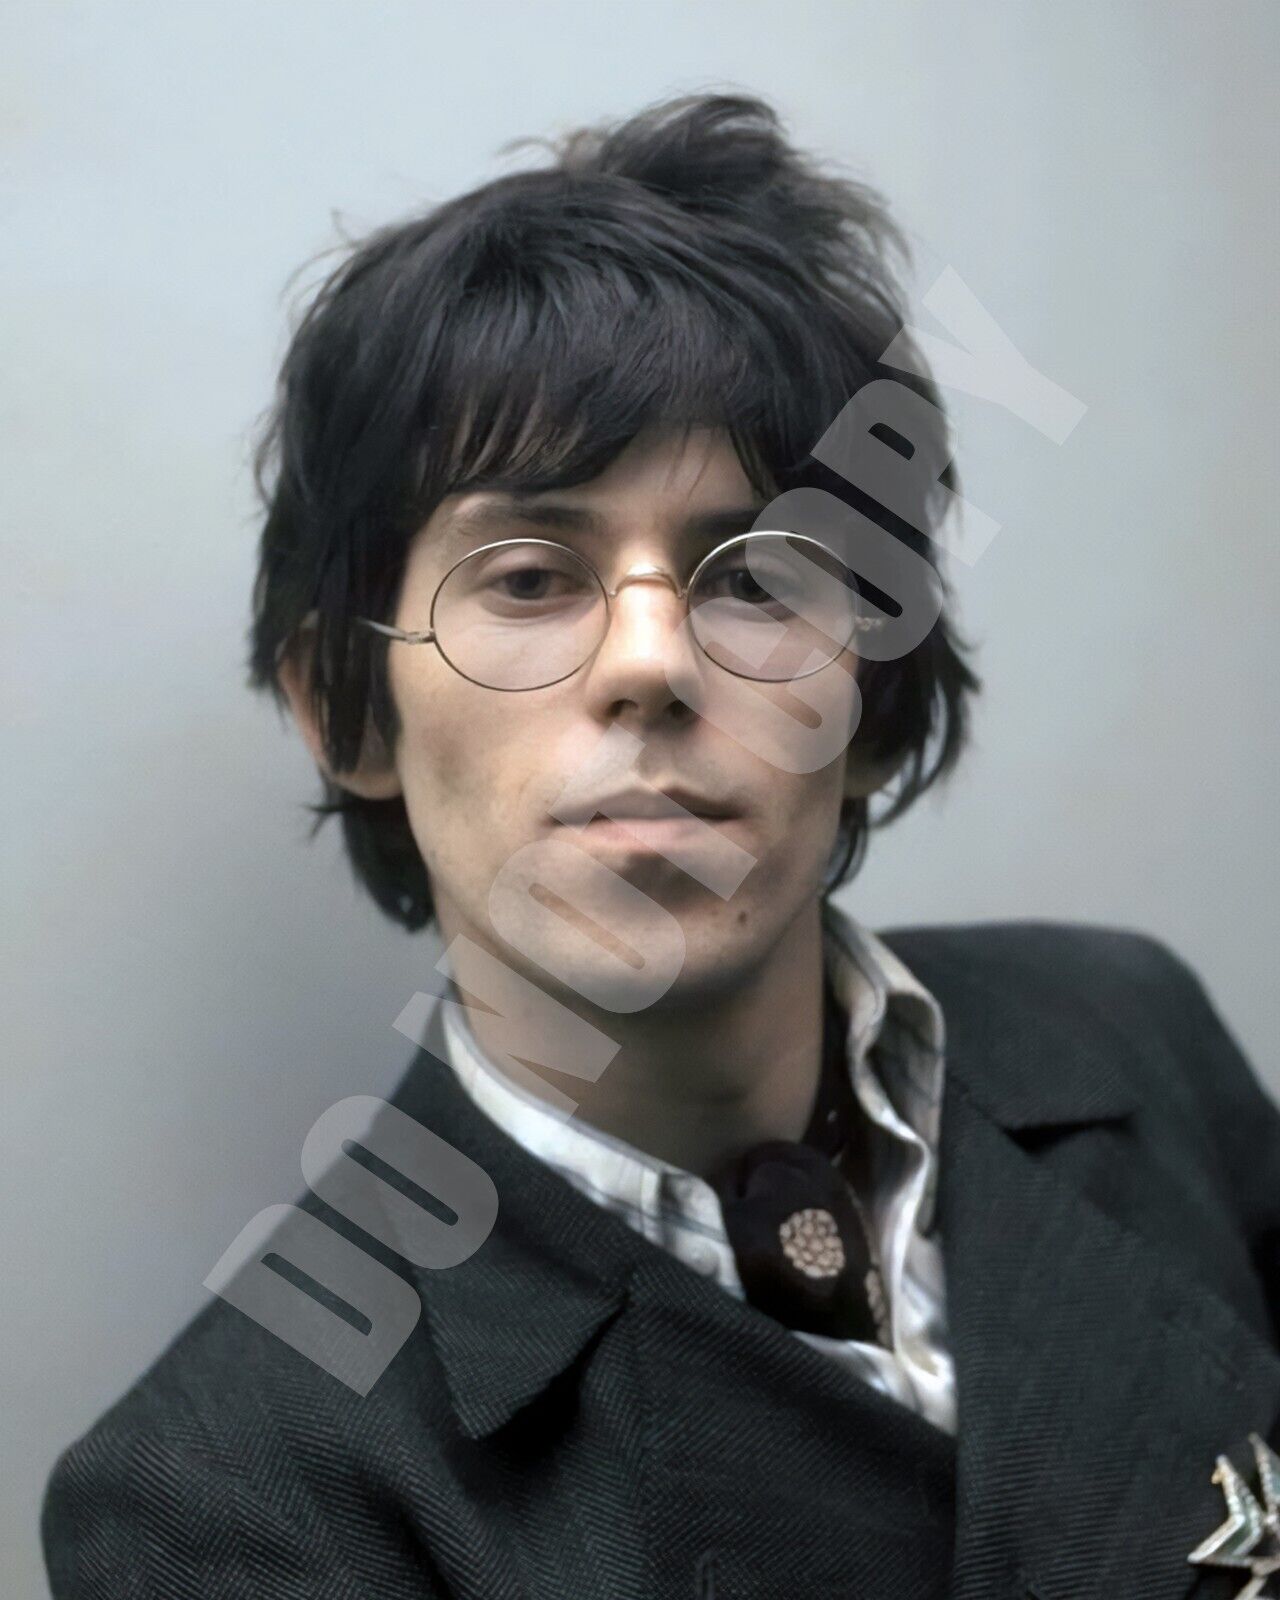 Young Keith Richards With Glasses Rolling Stones 8x10 Photo